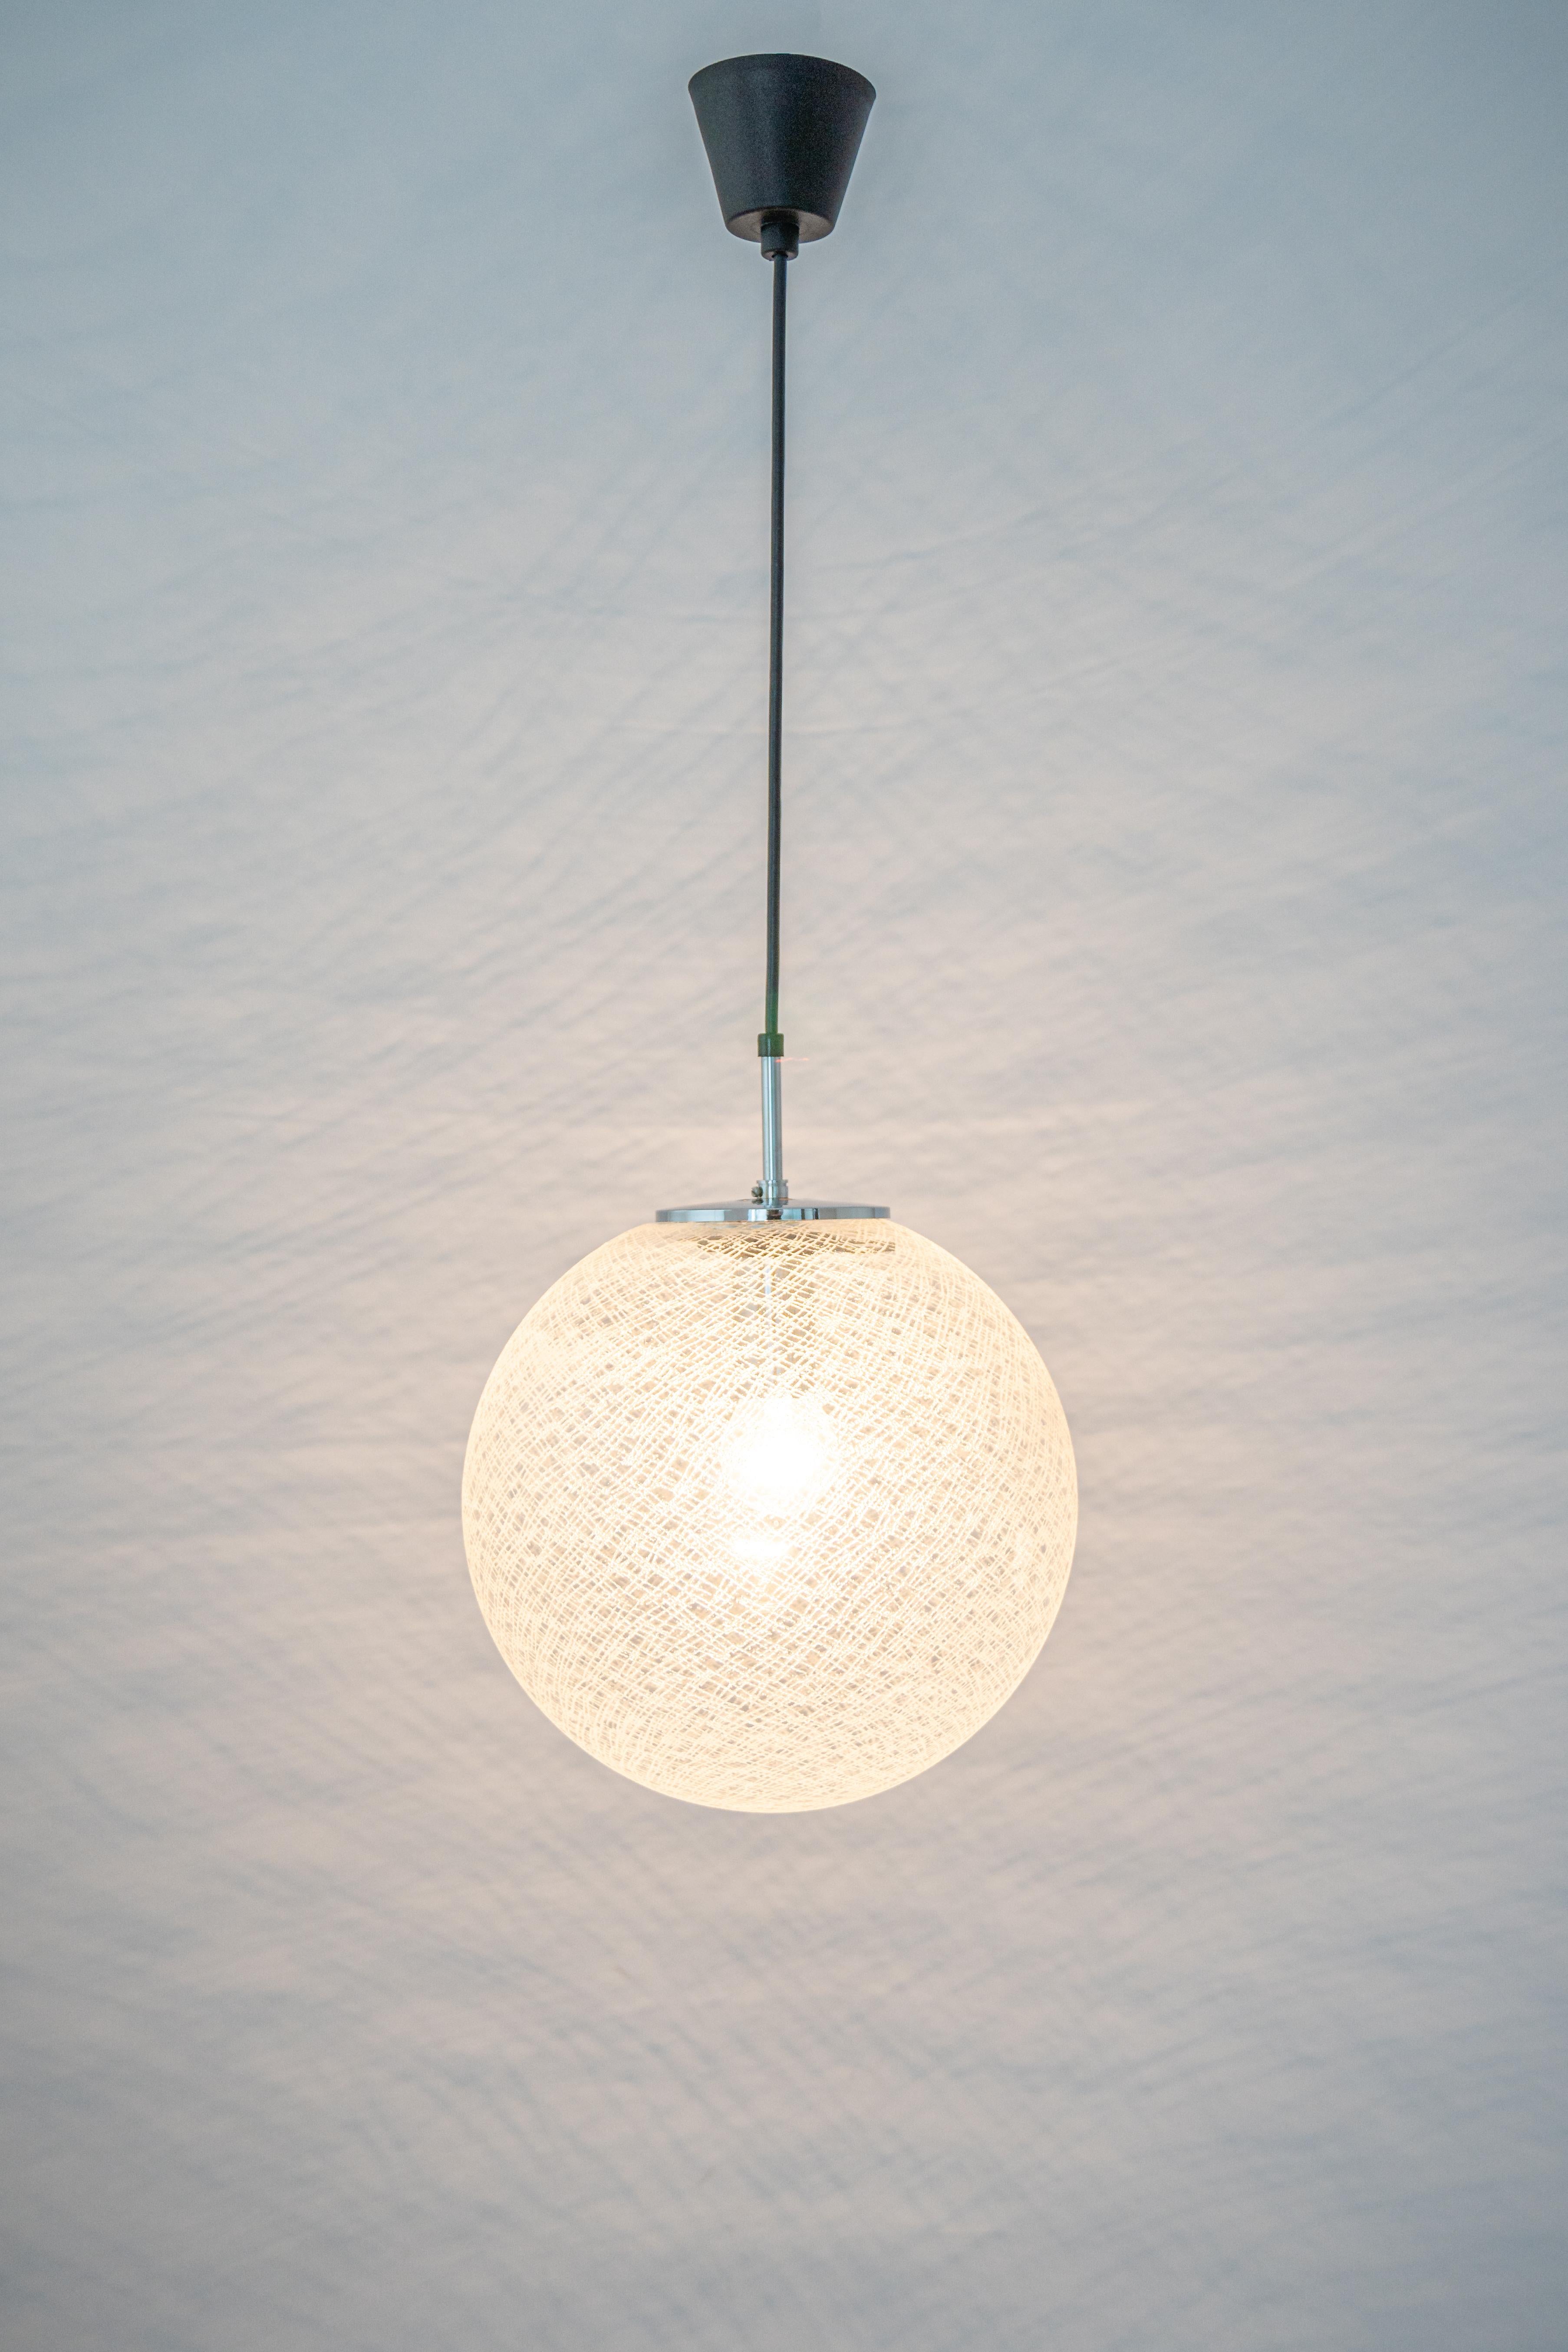 1 of 8 clear glass ball (hand-made) pendants, manufactured by Limburg, Germany, circa 1970-1979.

Sockets: 1 x E27 standard bulbs.
Light bulbs are not included. It is possible to install this fixture in all countries (US, UK, Europe, Asia,